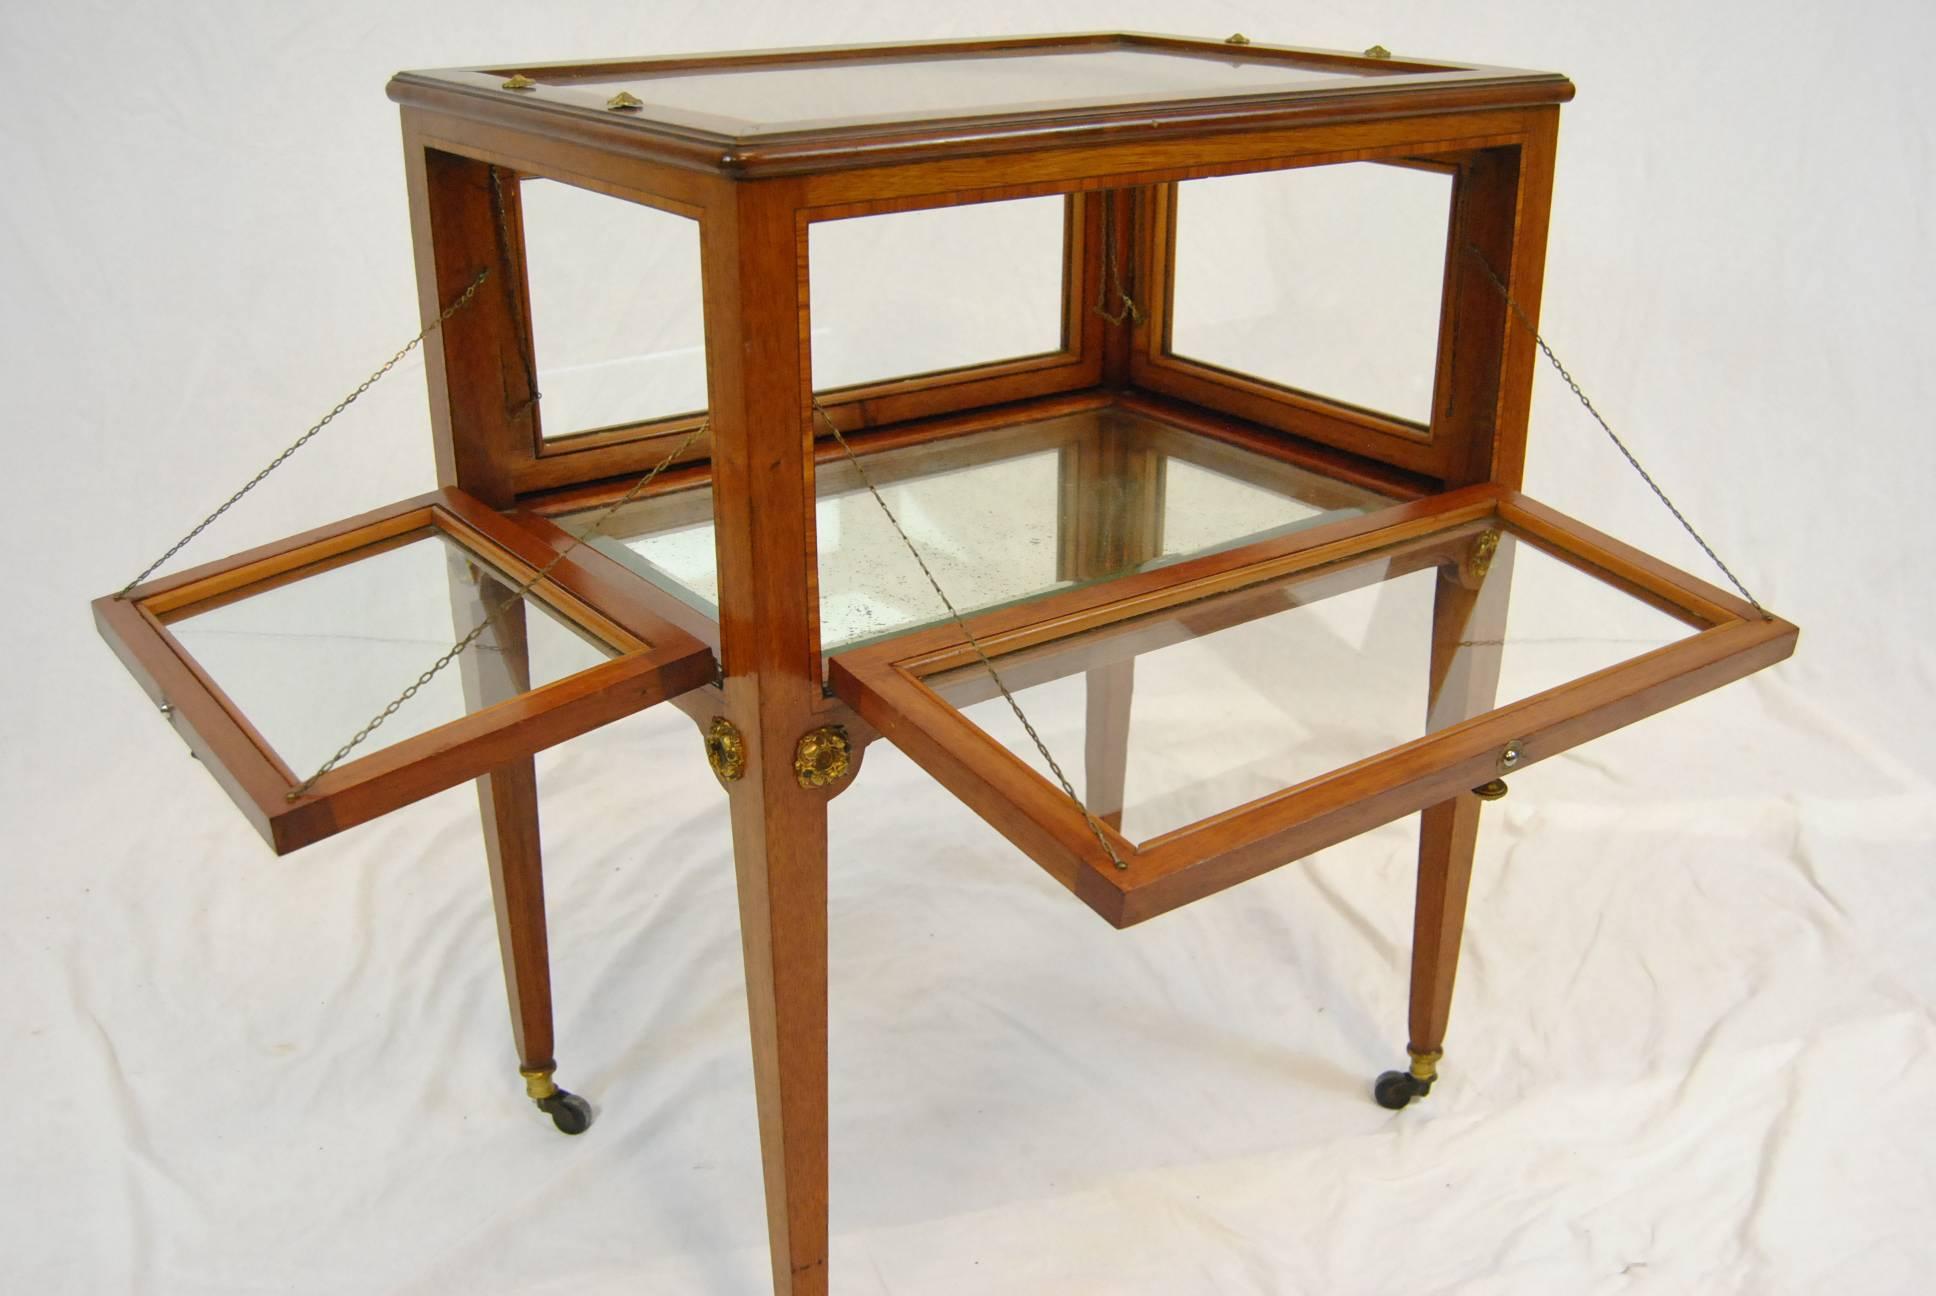 A beautiful mahogany and burled walnut etagere butler server, tea cart. This lovely piece features a glass case with pull down sides for easy access, brass piano hinges, ornate brass handles and a satinwood inlaid border.